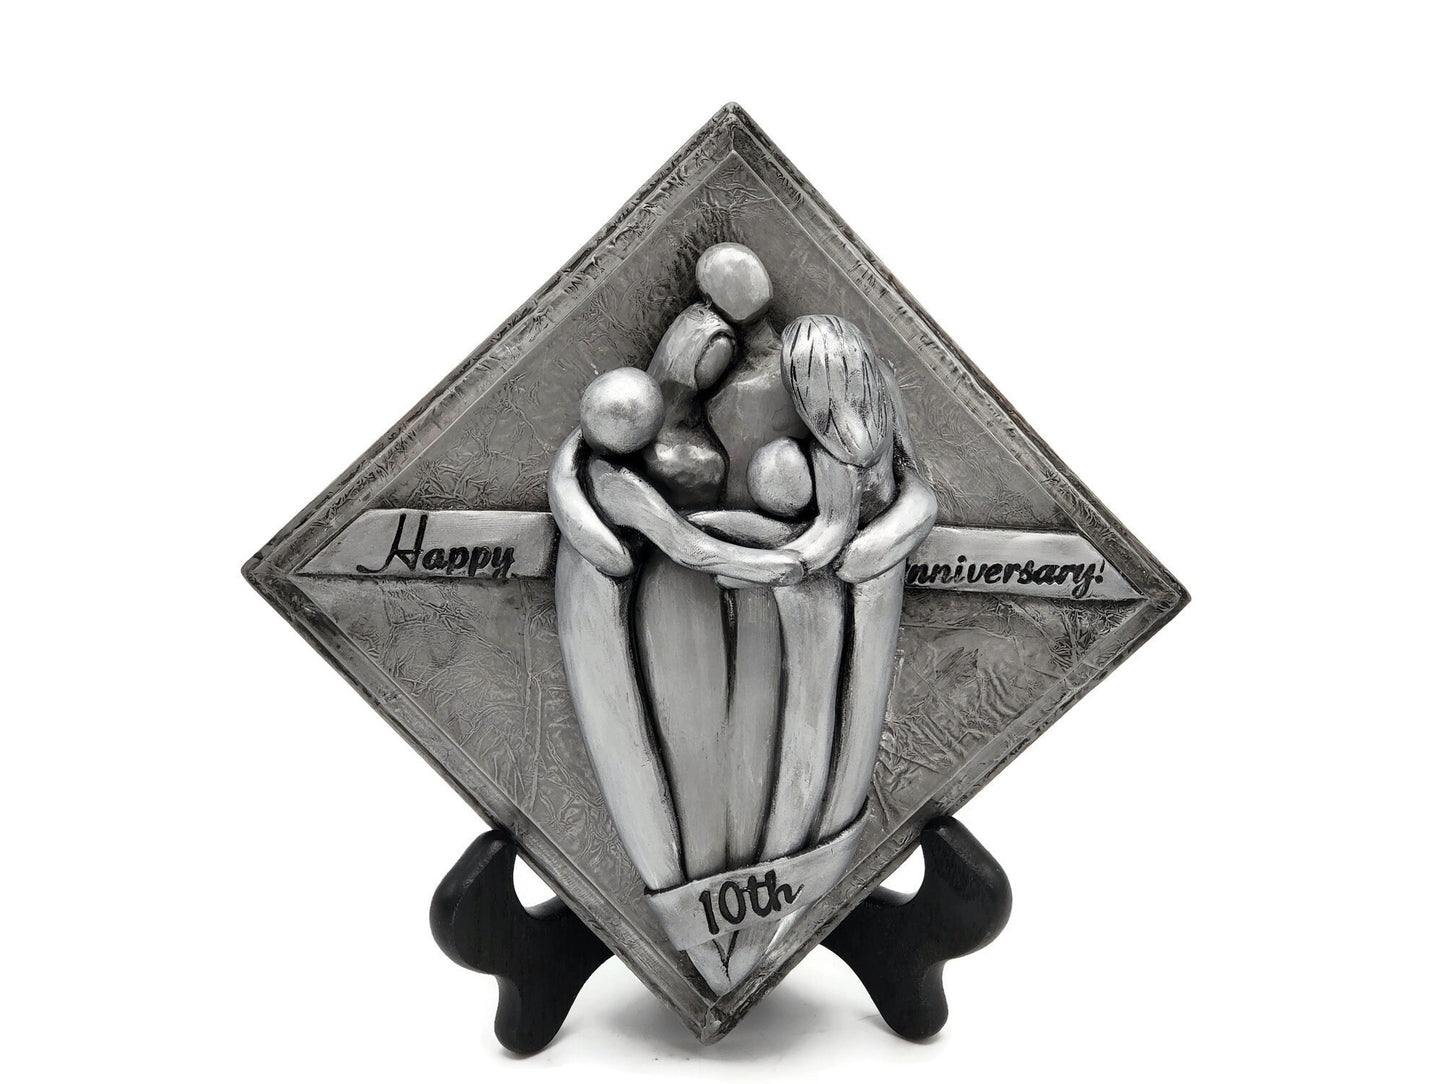 Happy 10th Anniversary Aluminum Plaque, Tin Anniversary Gift, Tenth Wedding Anniversary Gift for Him and Her